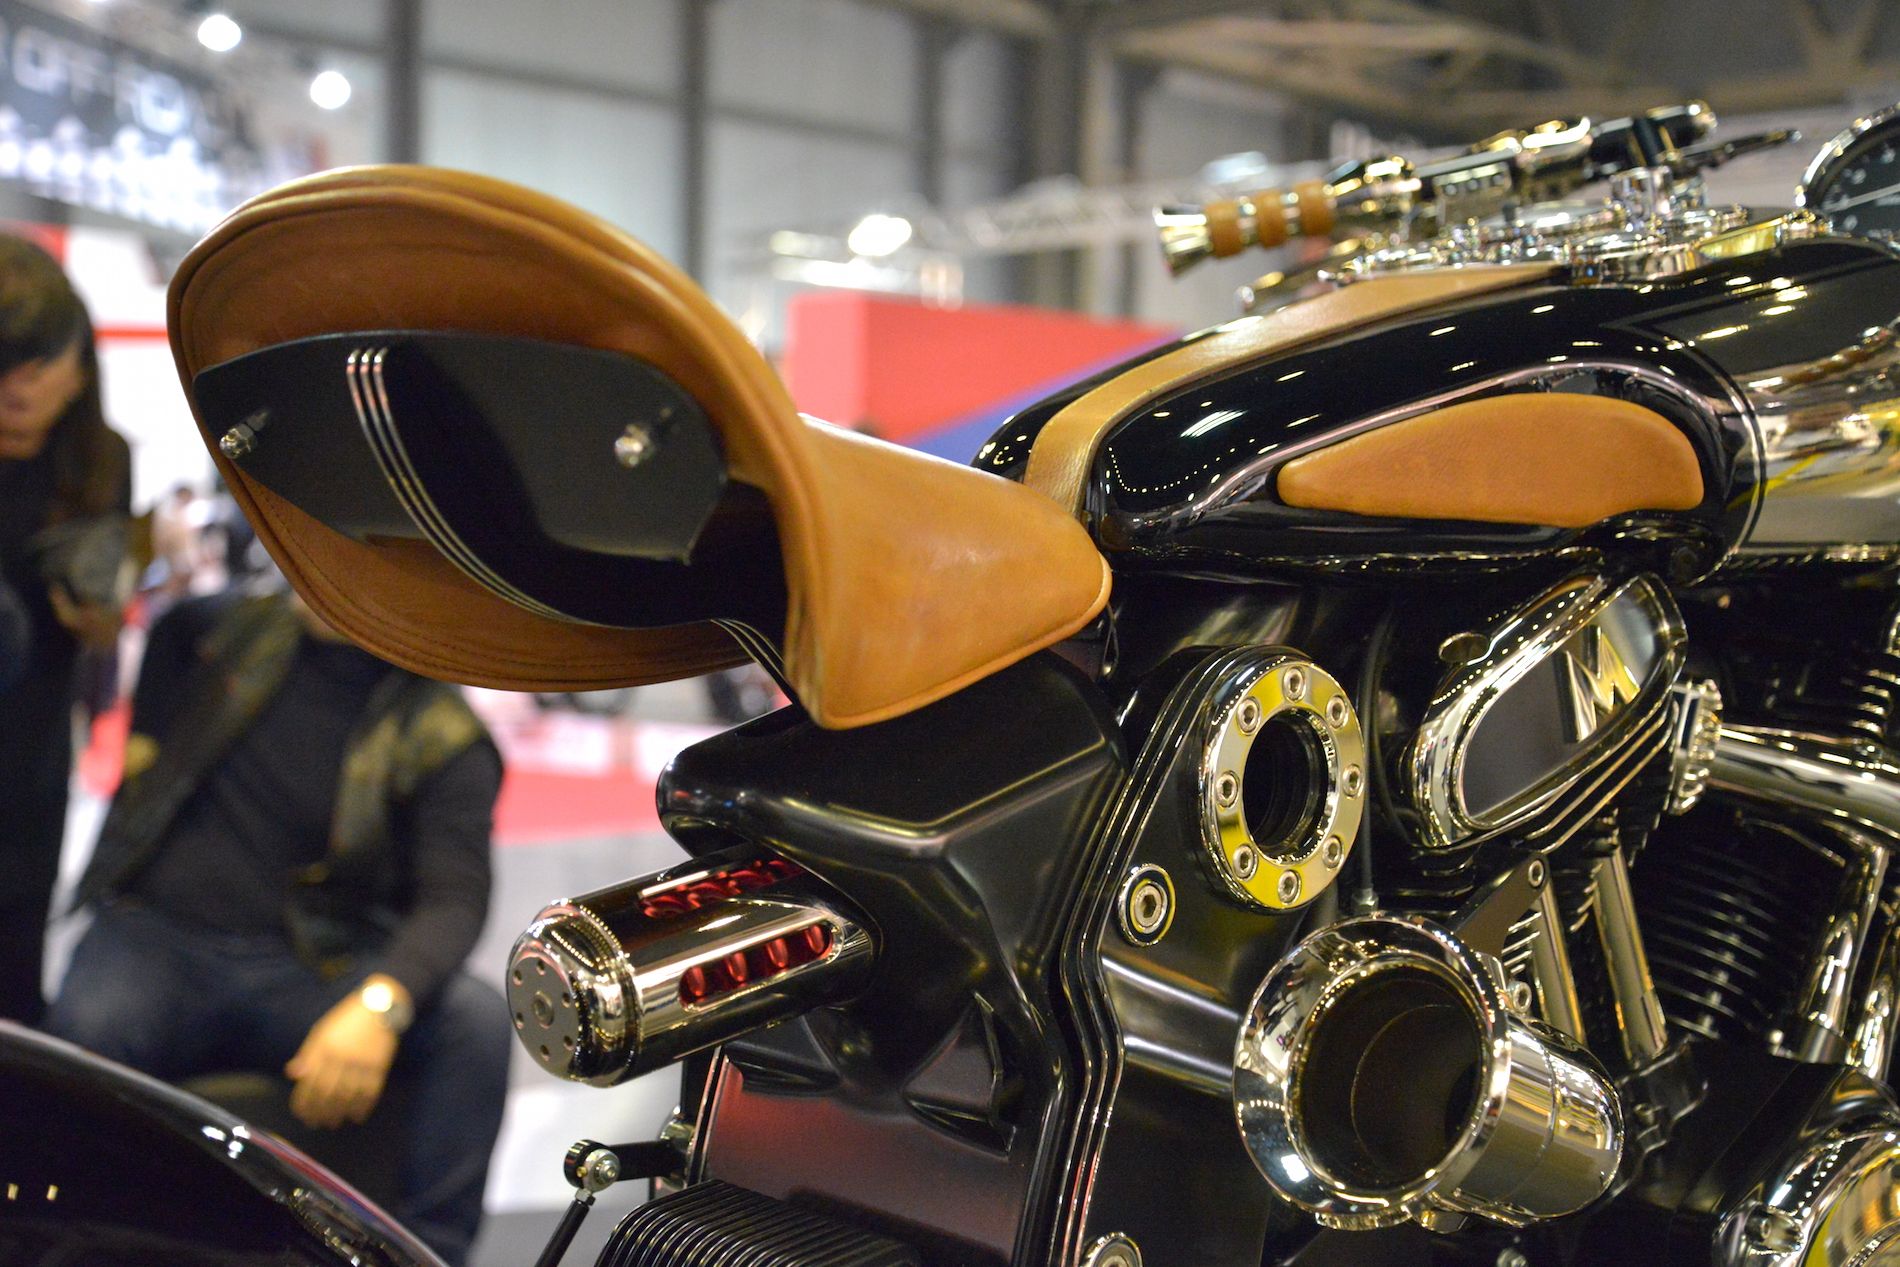 Matchless - Even the seat has its own suspension